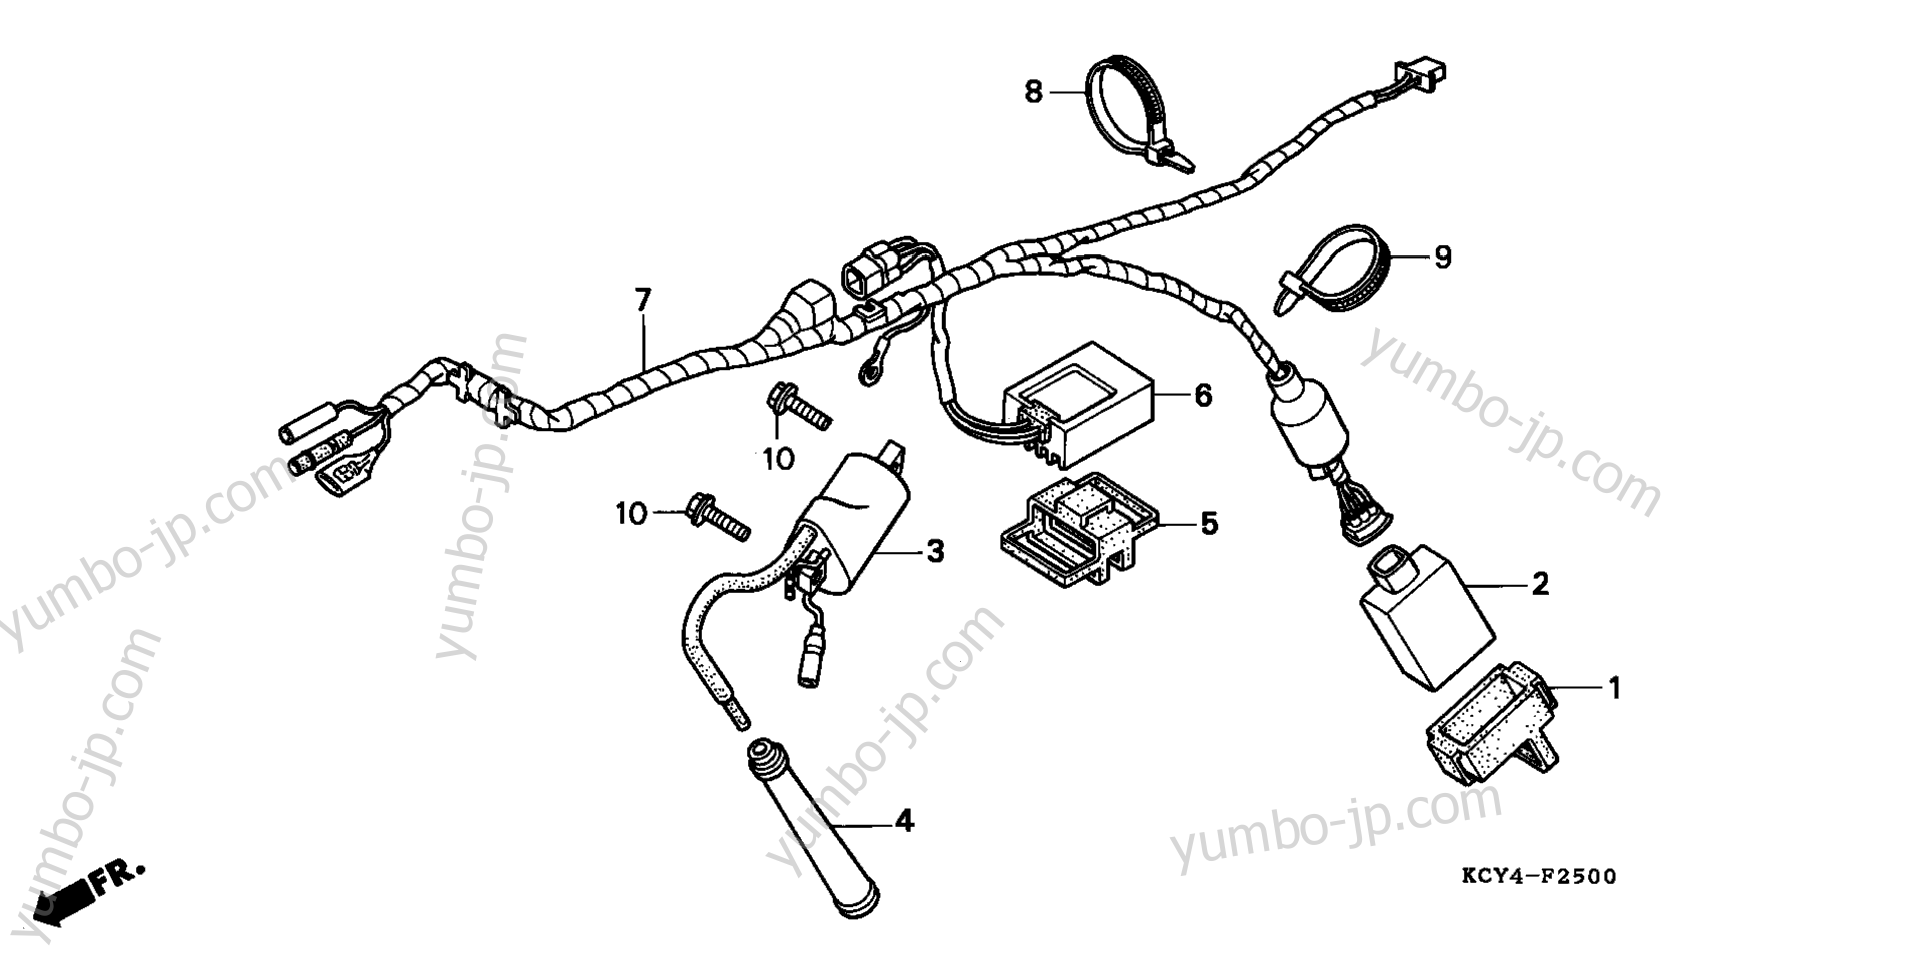 WIRE HARNESS for motorcycles HONDA XR400R A 2001 year